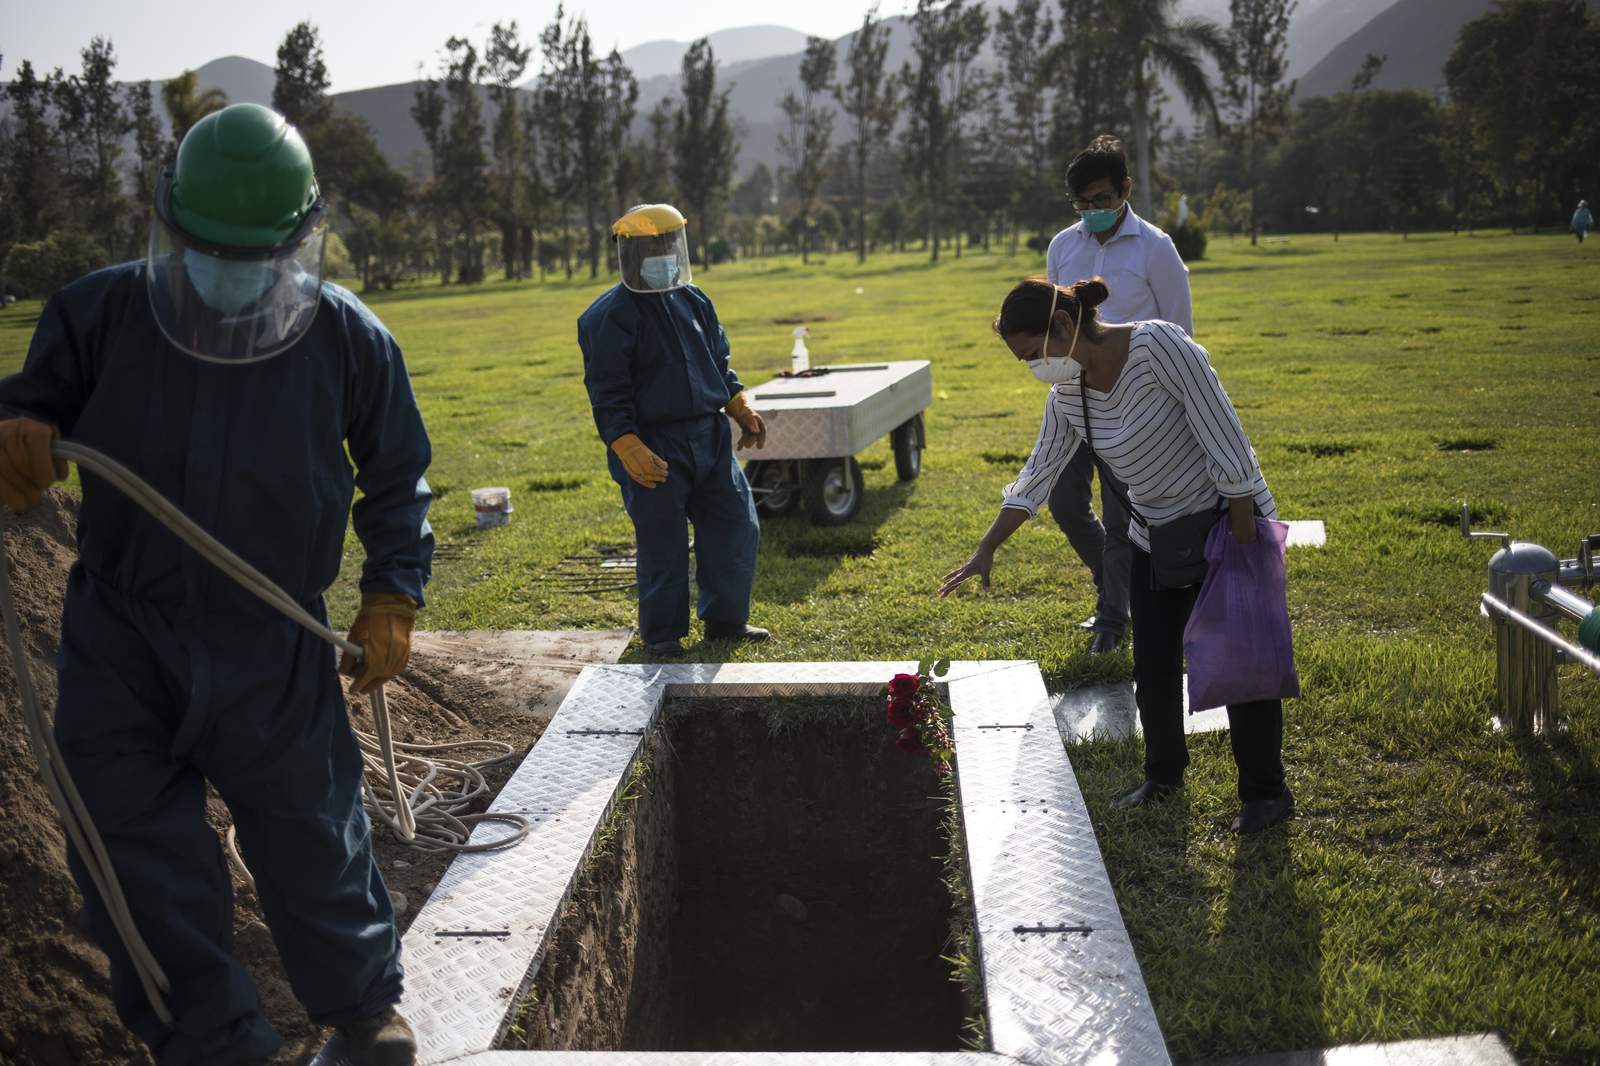 Pandemic's toll among journalists in Peru is especially high